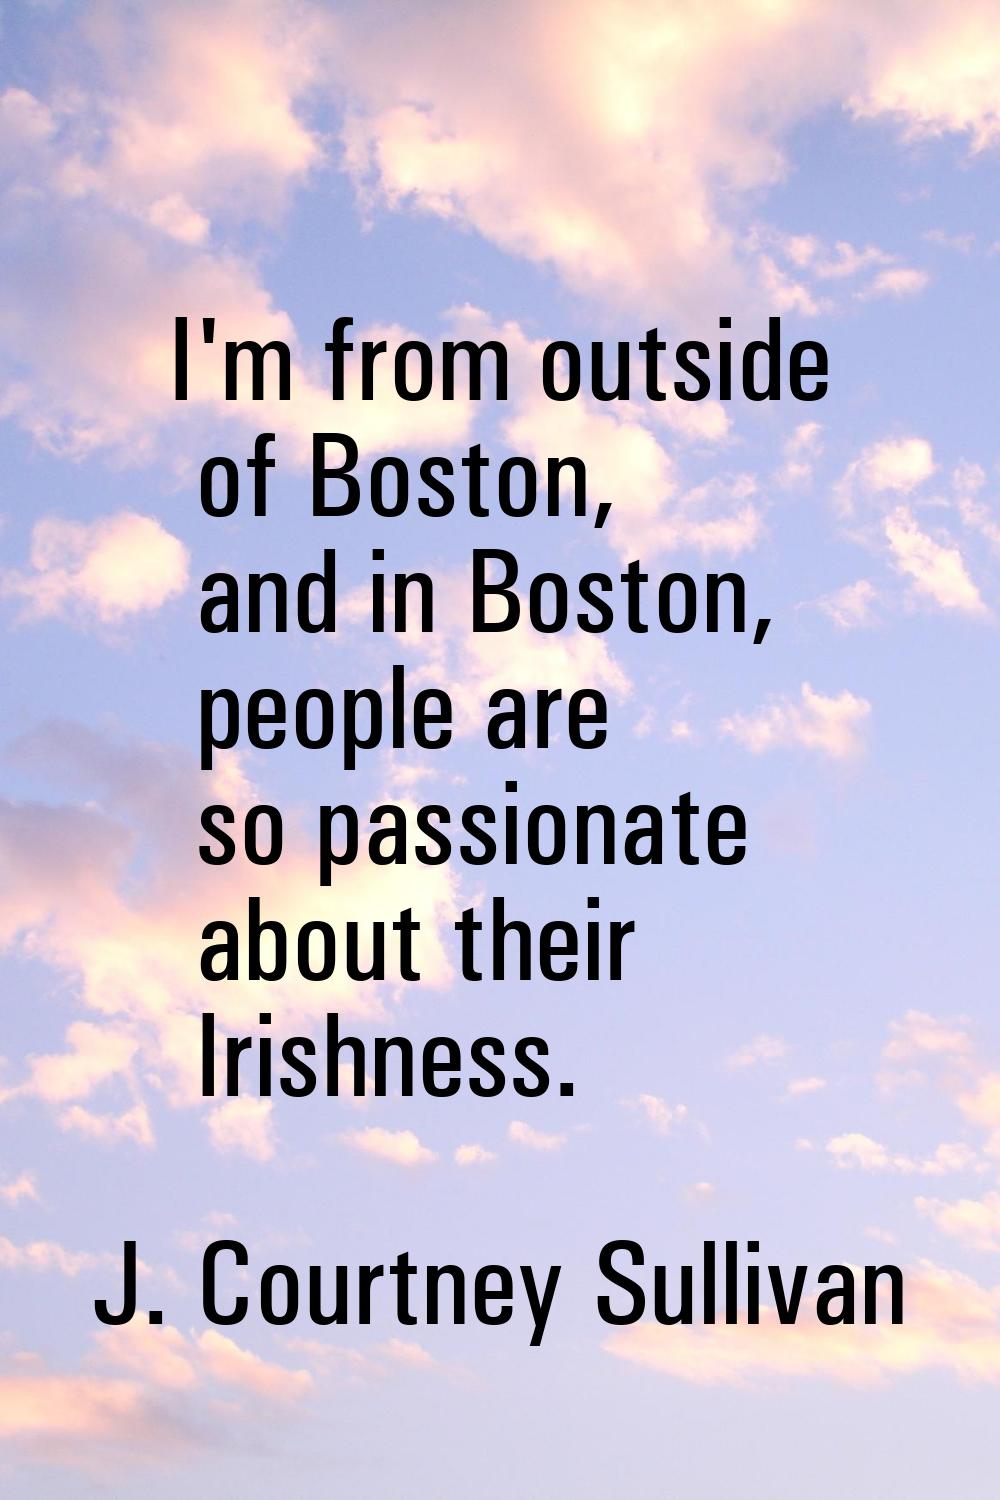 I'm from outside of Boston, and in Boston, people are so passionate about their Irishness.